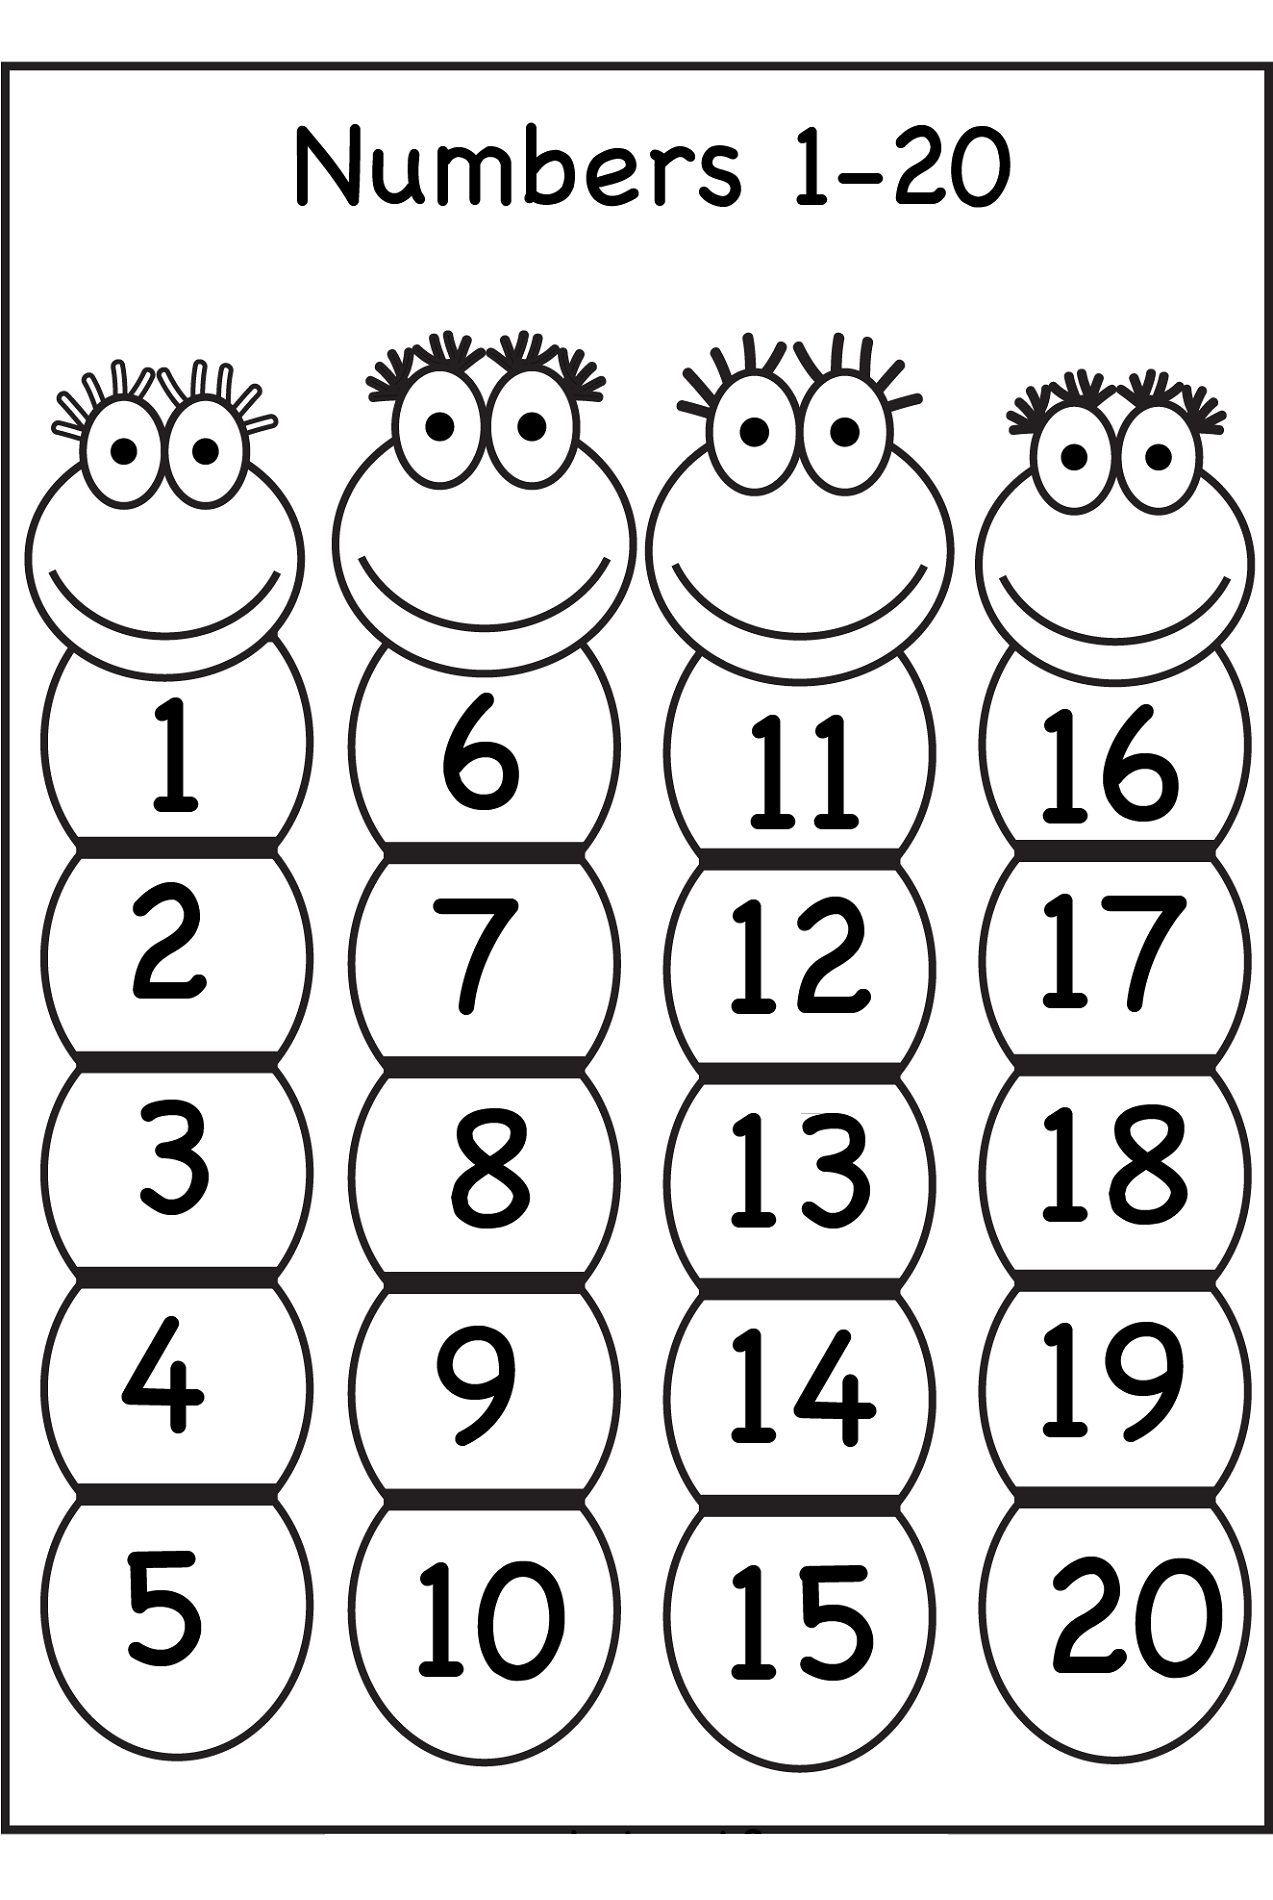 Number Tracing 11 20 Worksheet Digital Free Trace The Numbers 11 20 